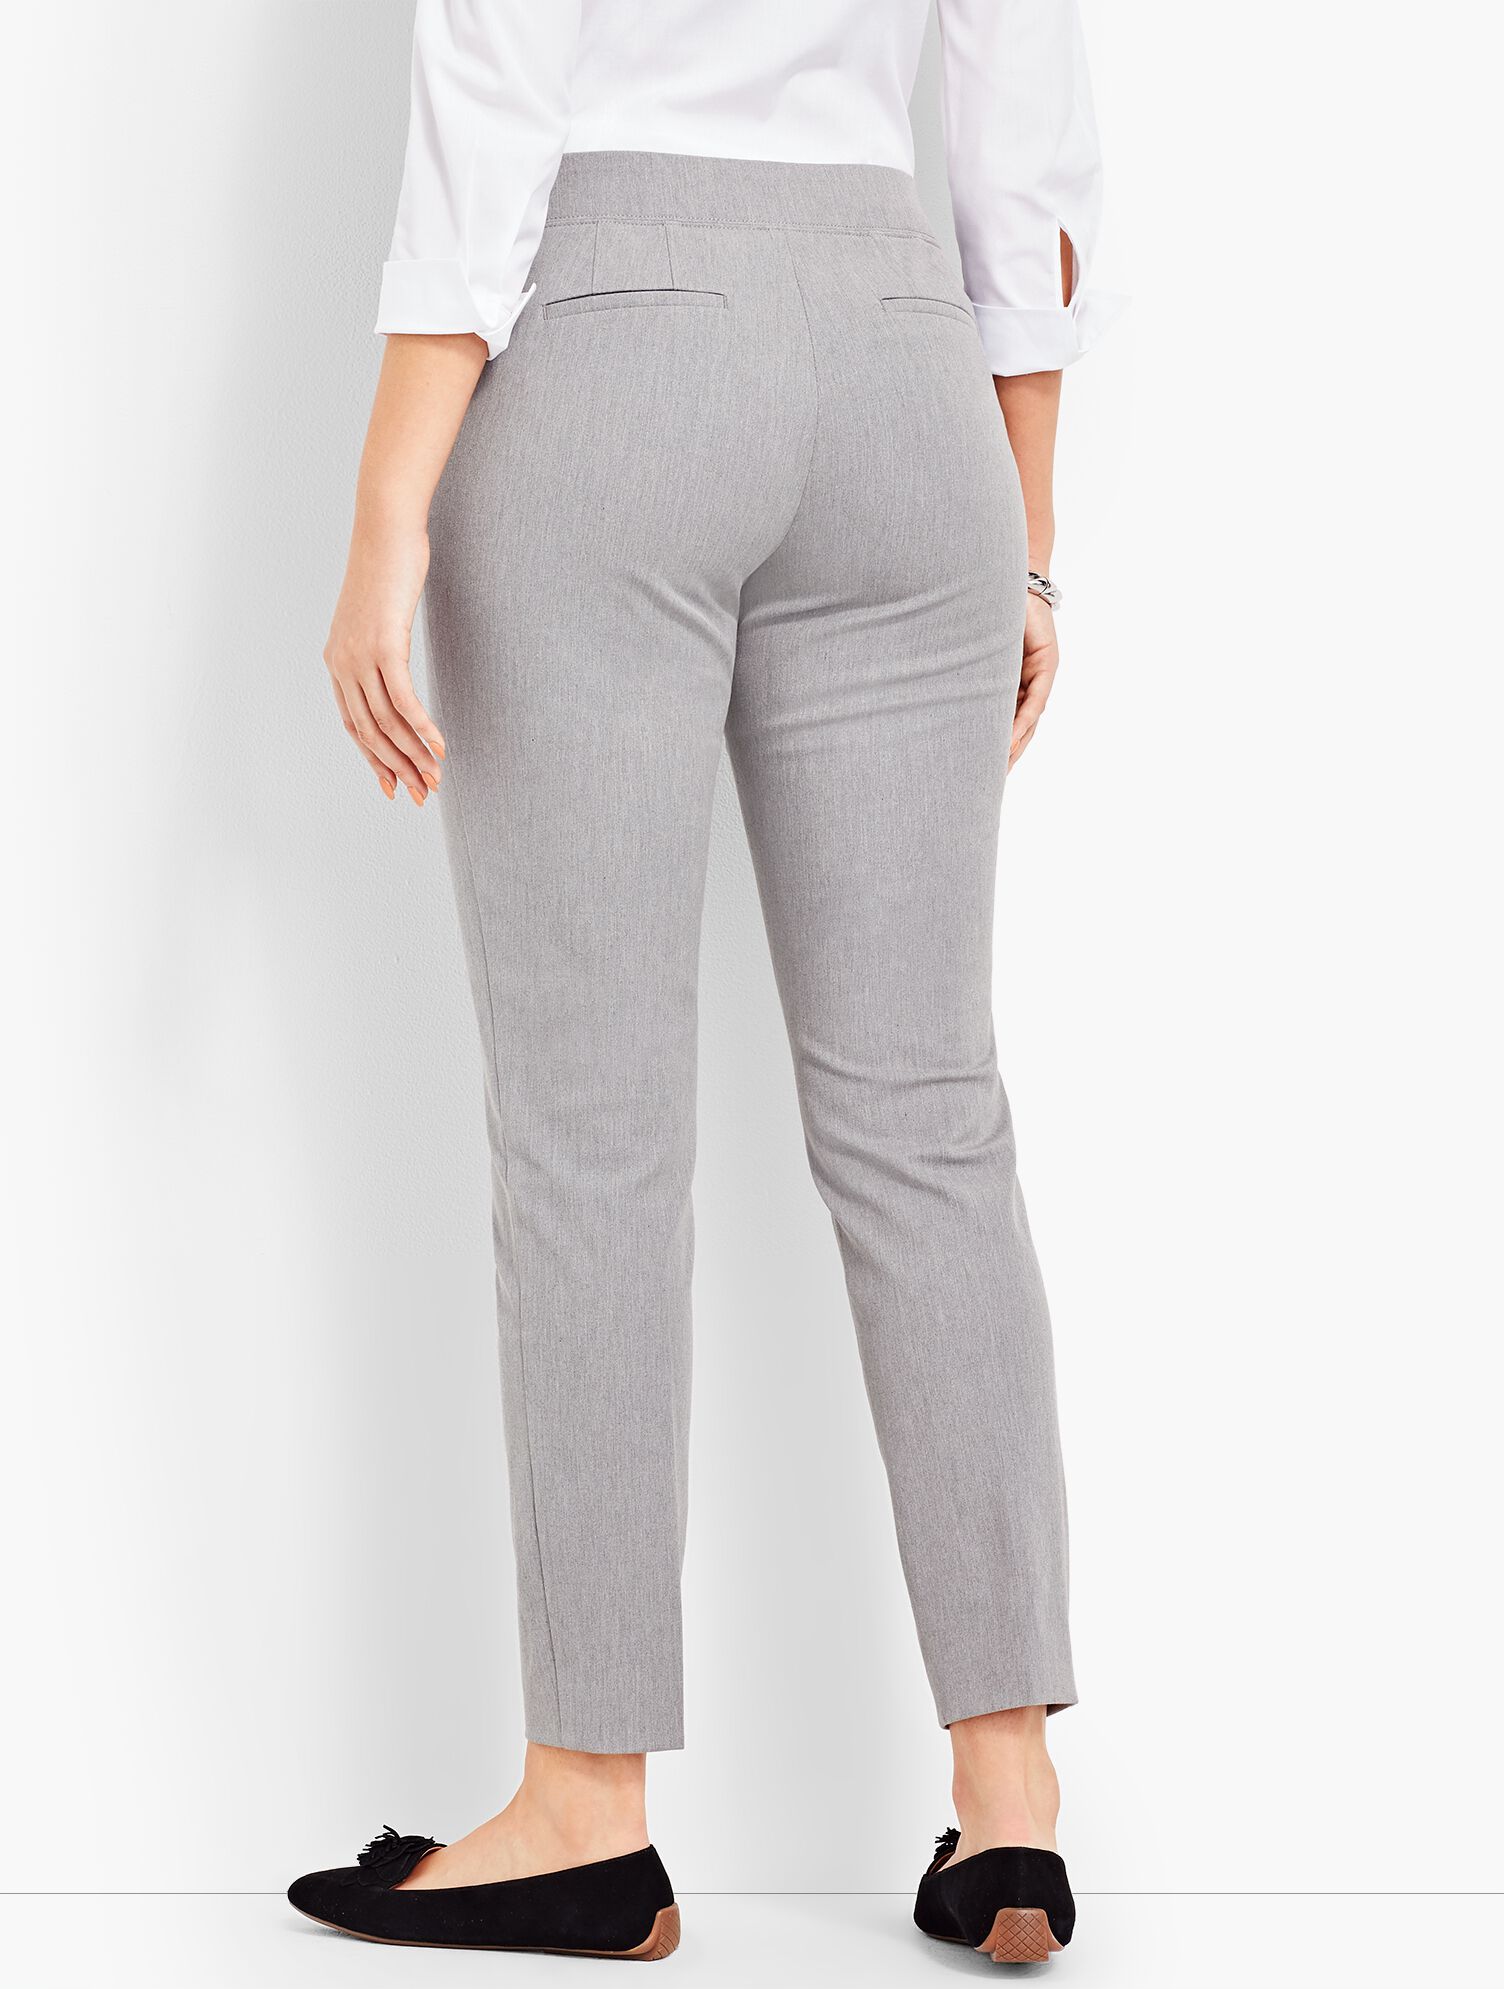 The Ankle Pant In Bi-Stretch - Curvy Fit